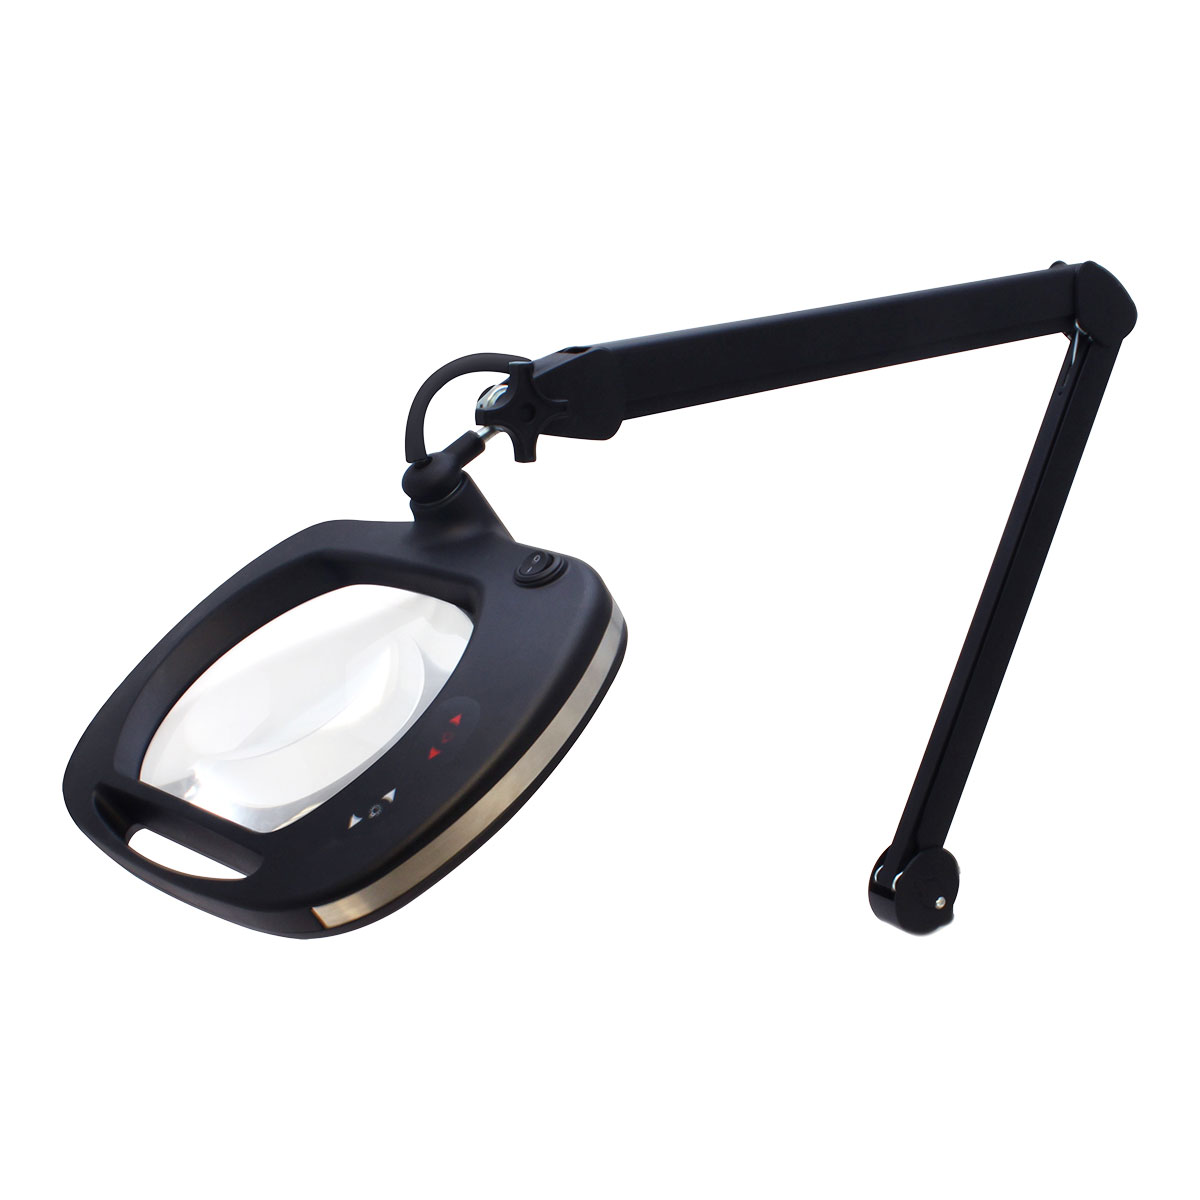 Aven Mighty Vue Pro 5 Diopter 2.25x Magnifying Lamp w/ Color Temperature Controls ESD Safe 